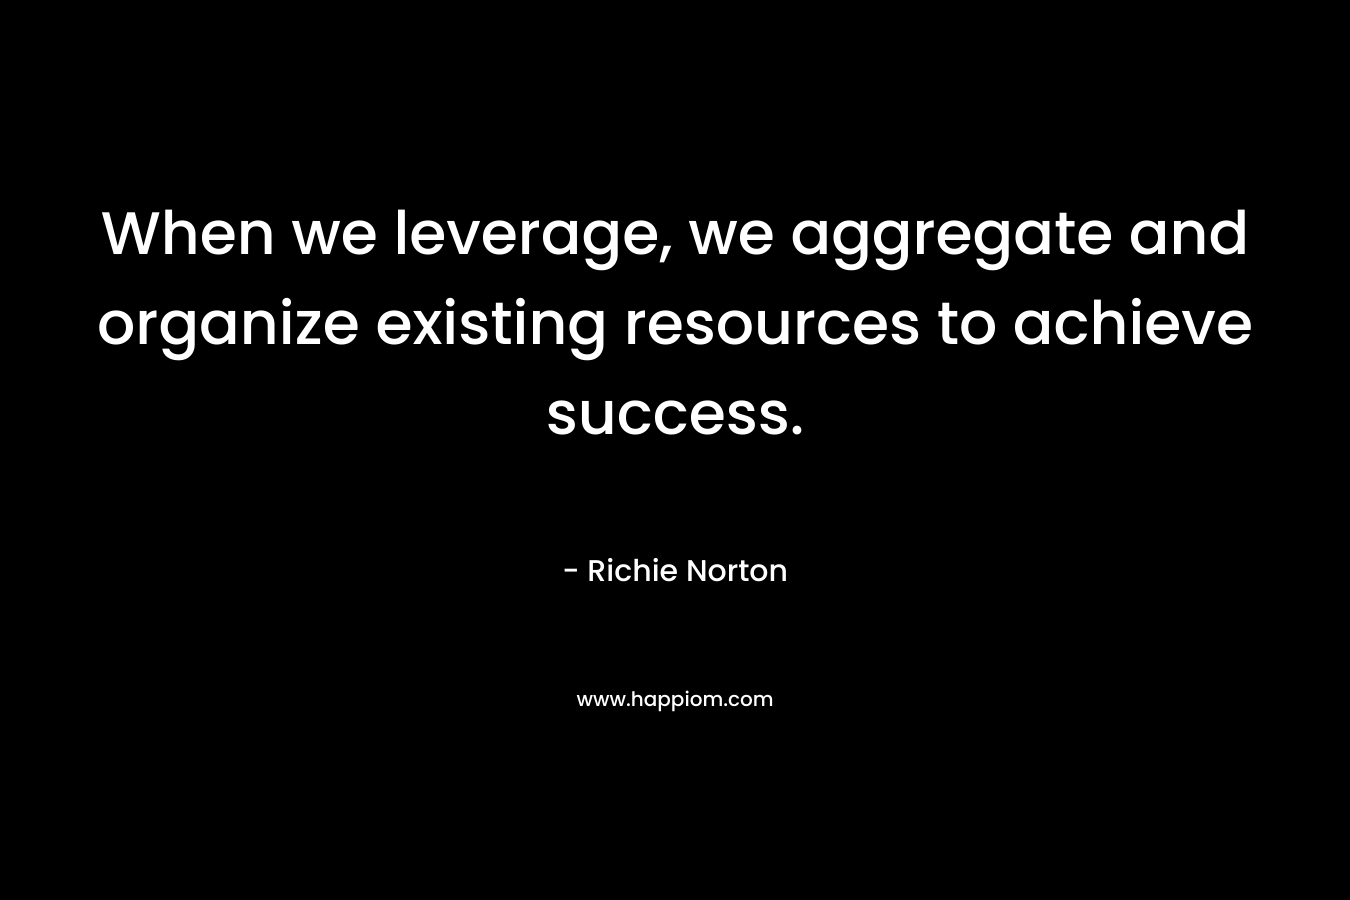 When we leverage, we aggregate and organize existing resources to achieve success.